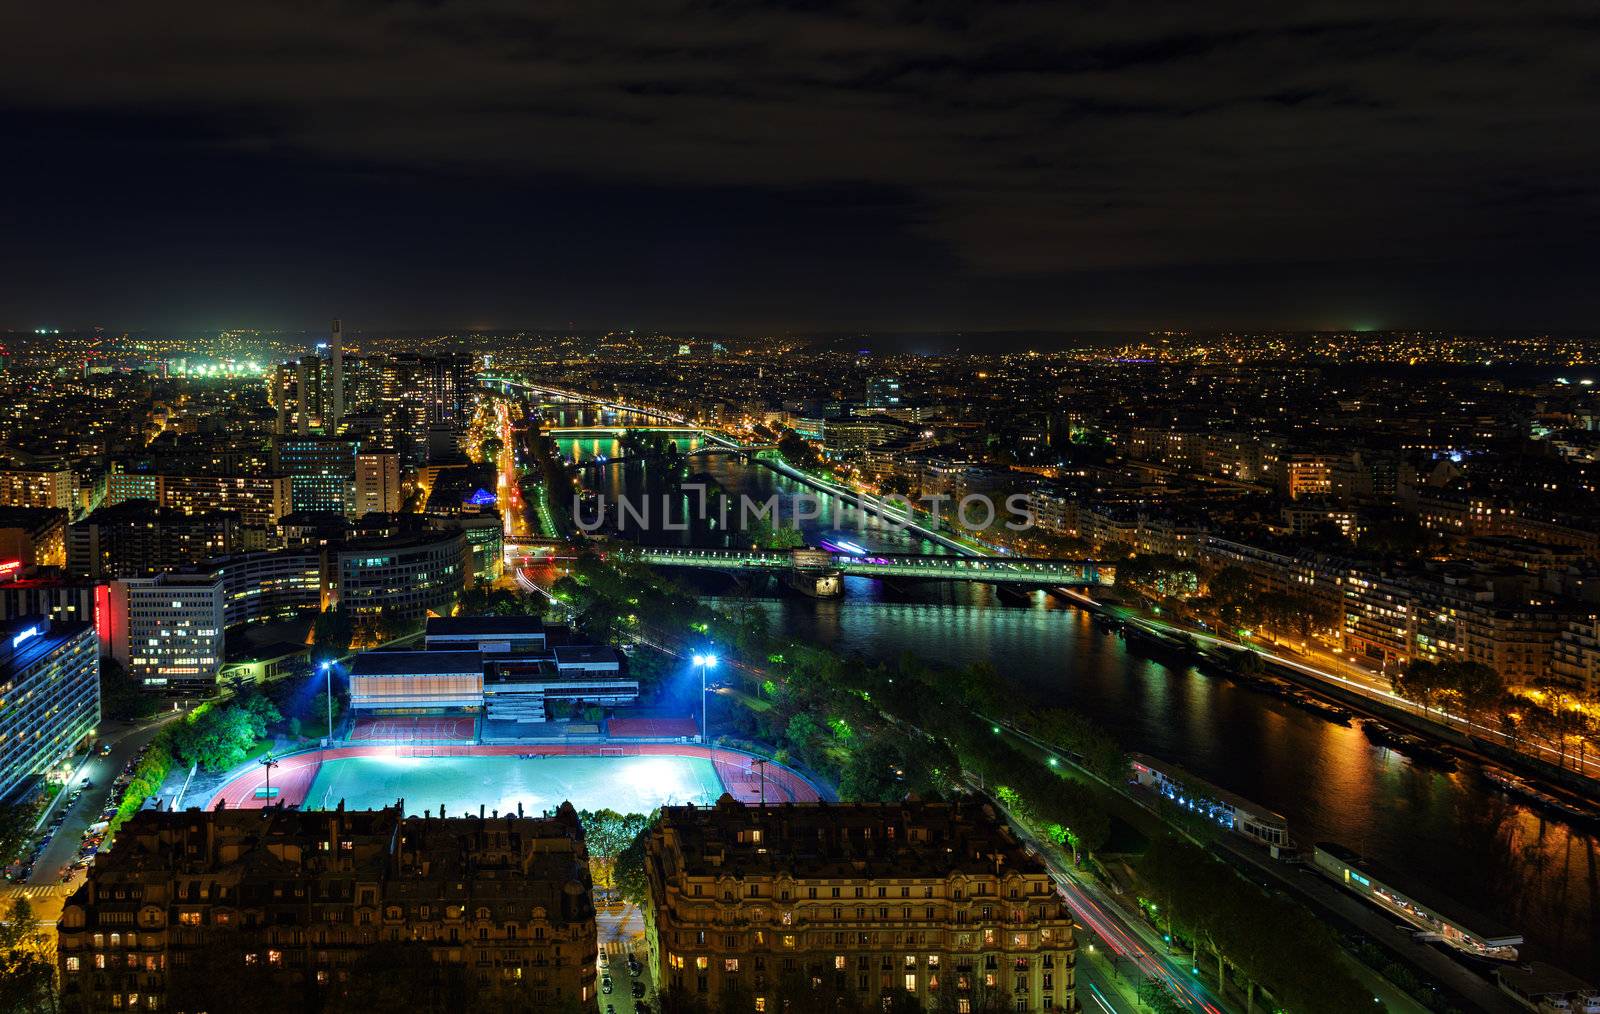 The night view of Paris city from the top of Eiffel tower